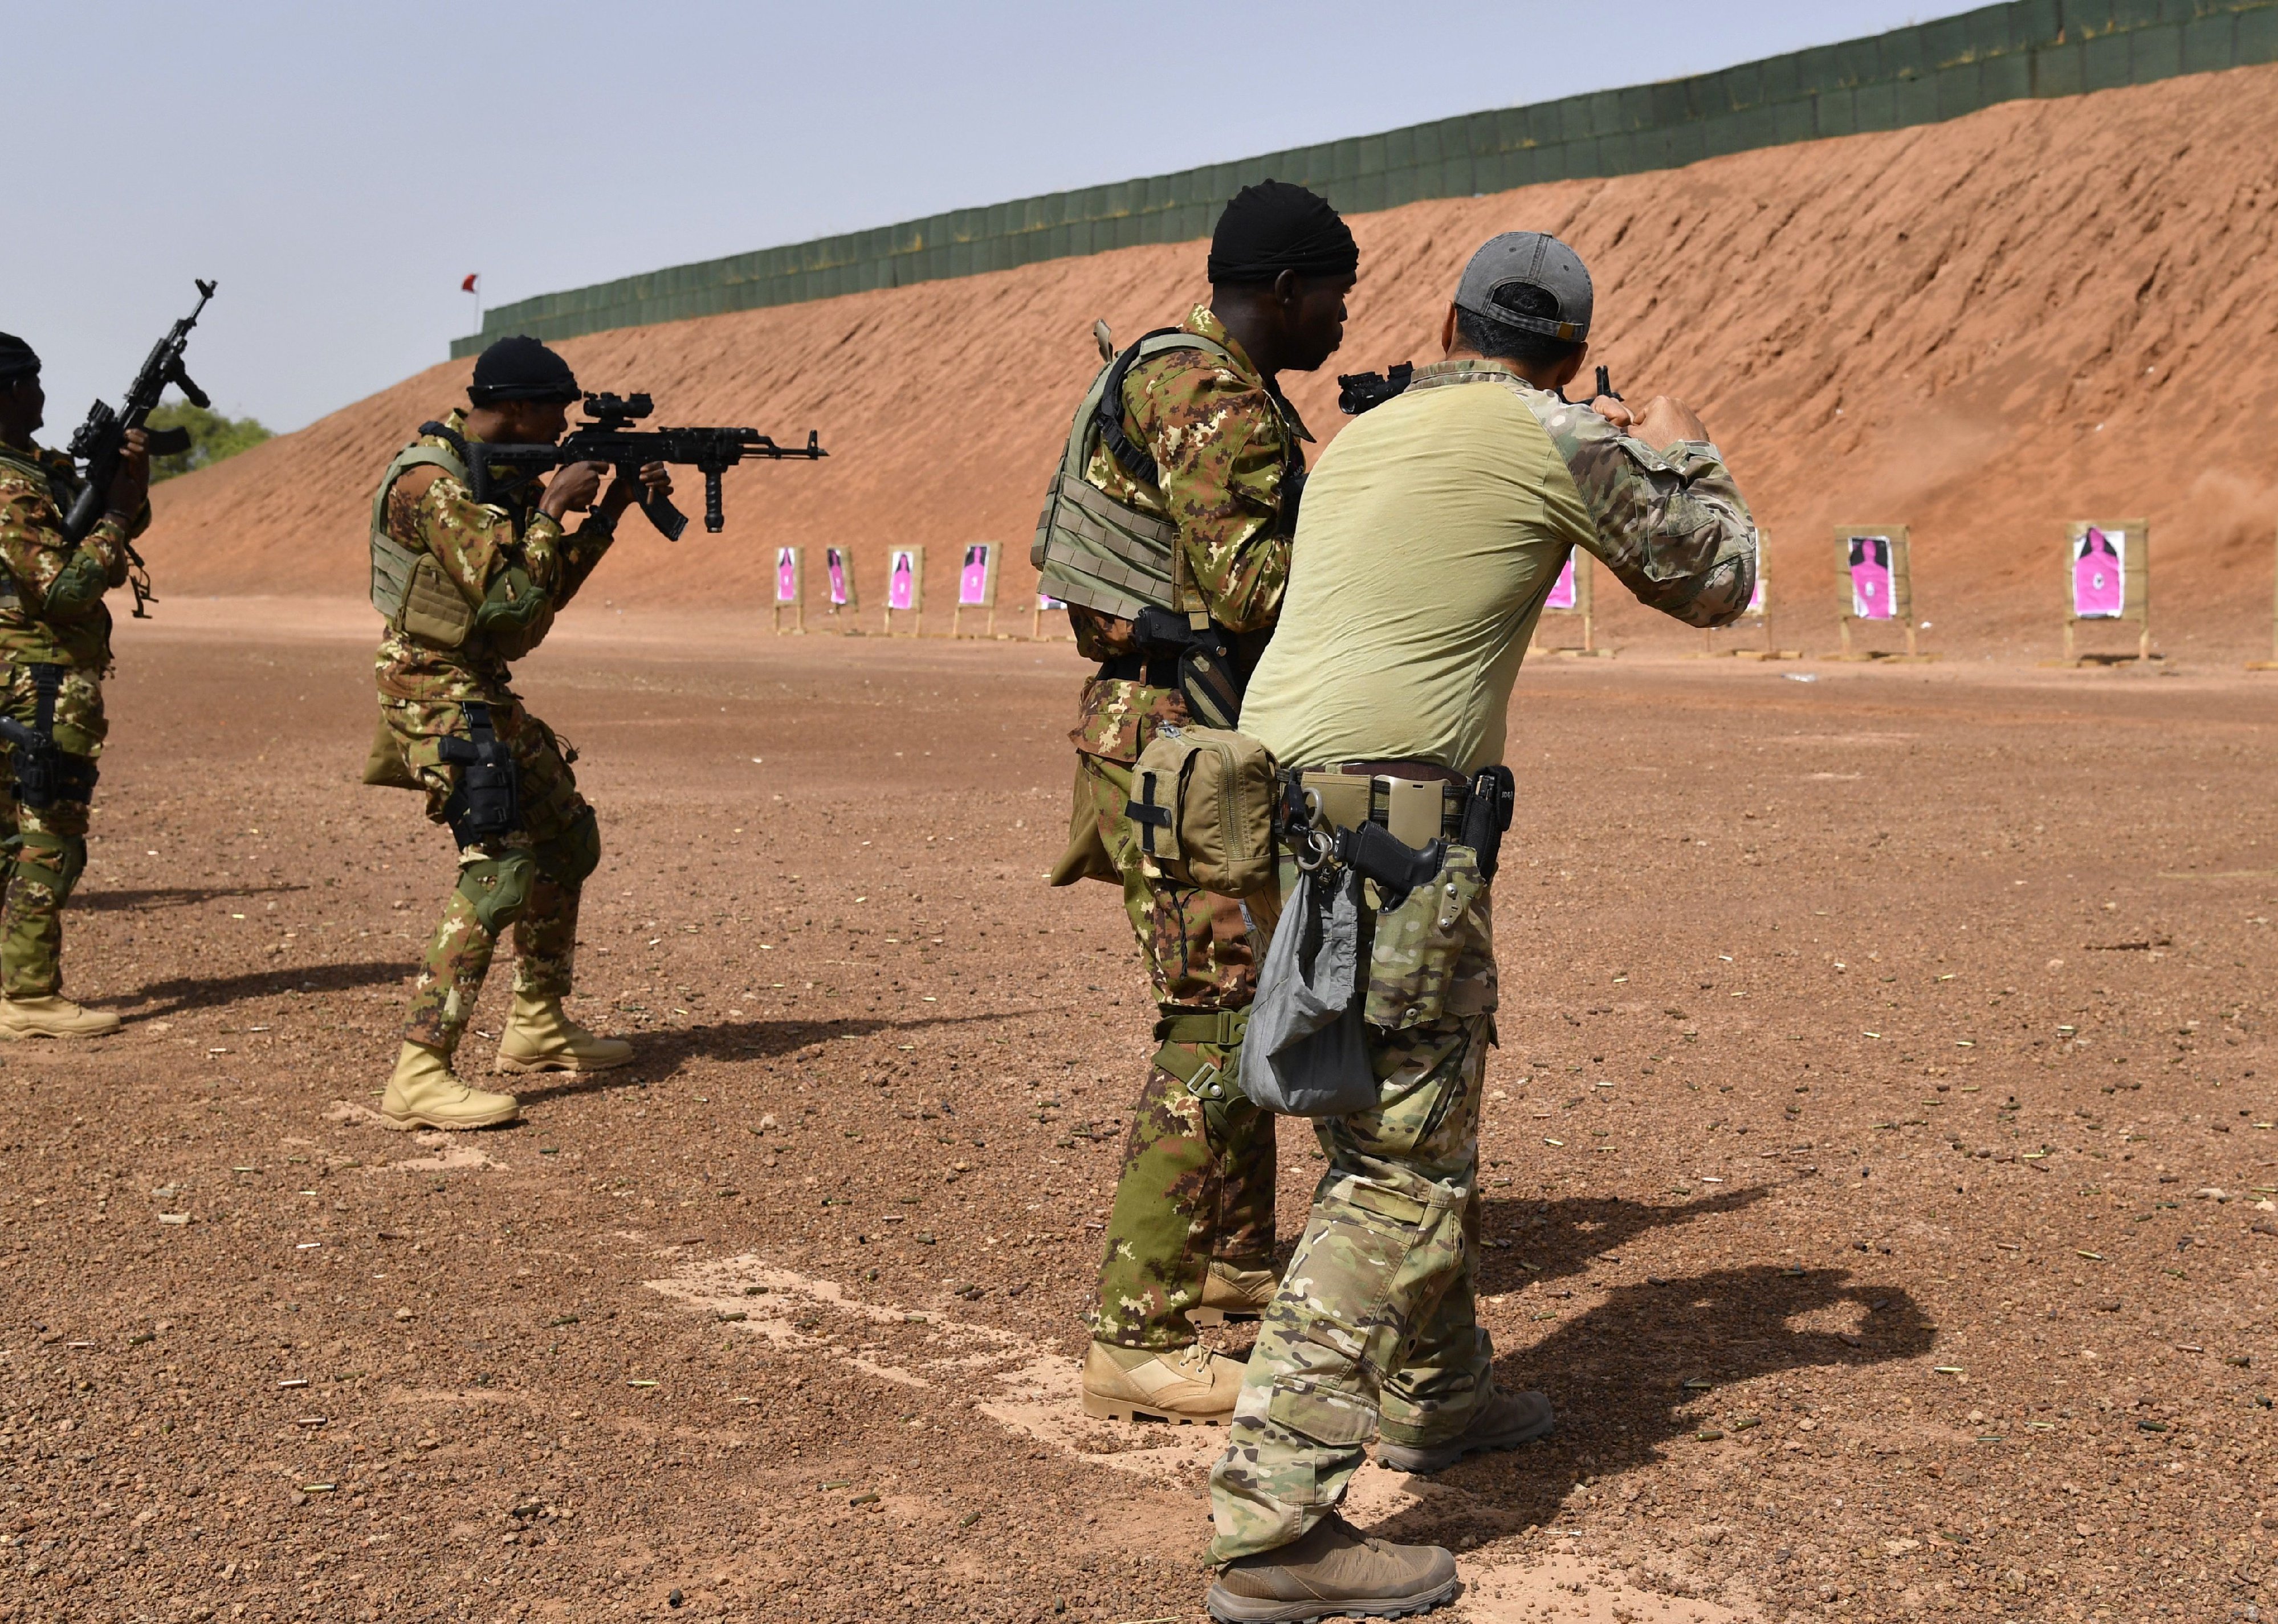 A US Army instructor gestures next to Malian soldiers during an anti-terrorism exercise.